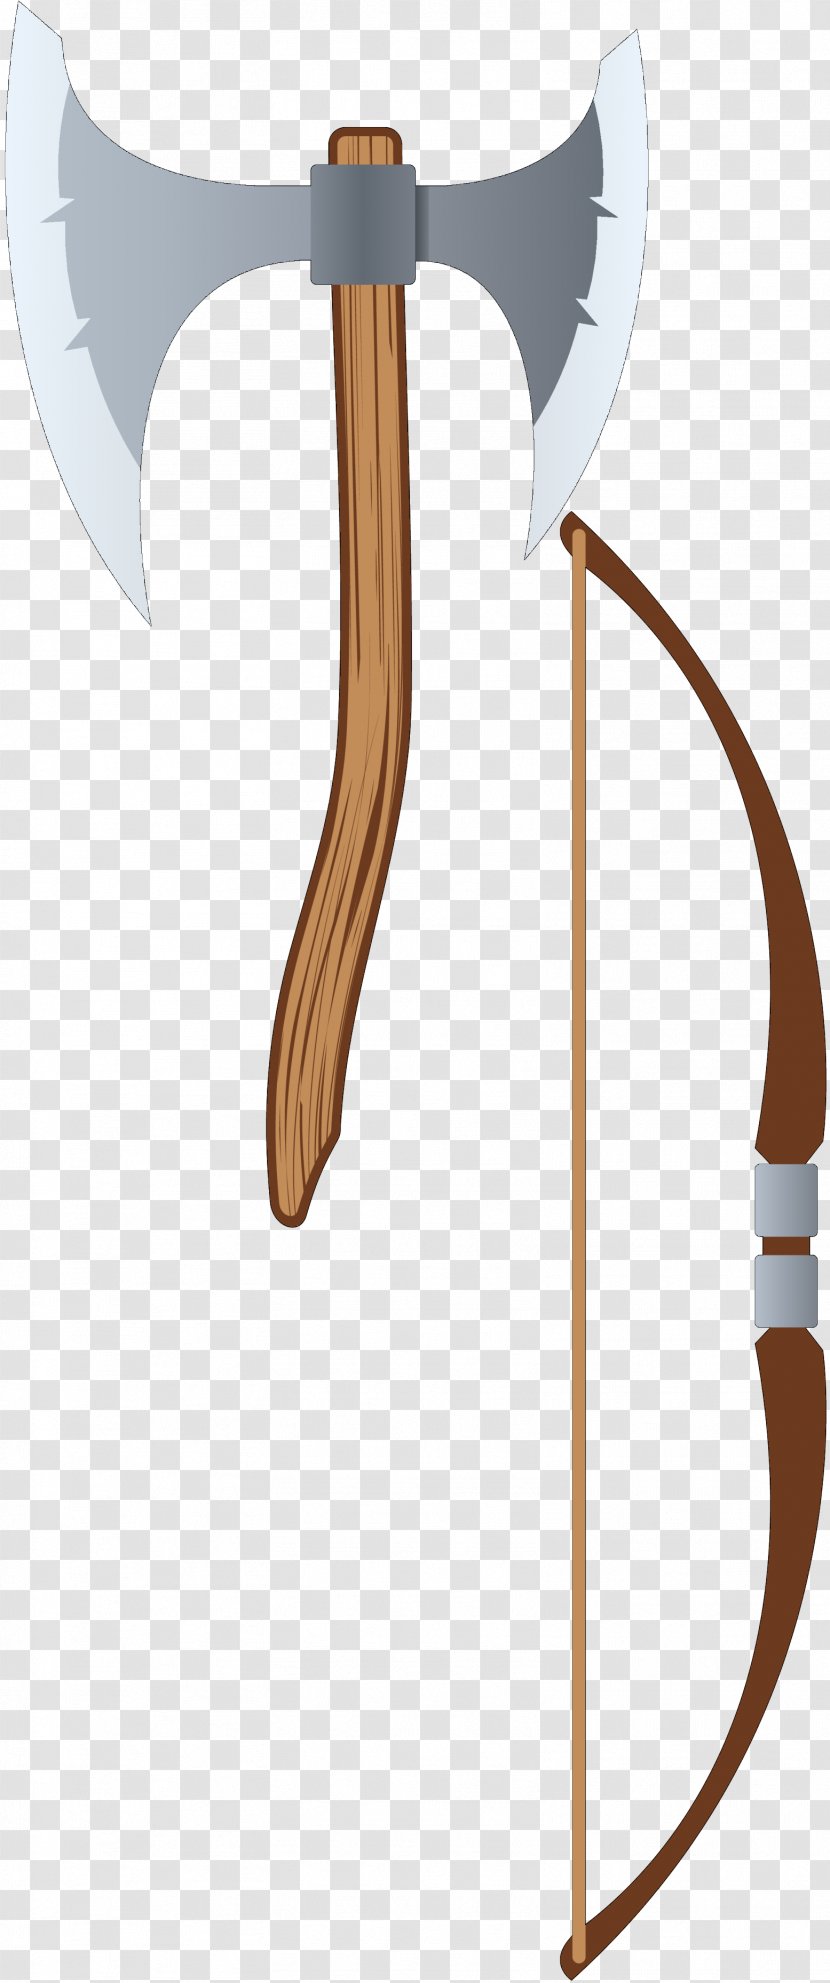 Throwing Axe Ranged Weapon Product Design - Bow And Arrow Transparent PNG